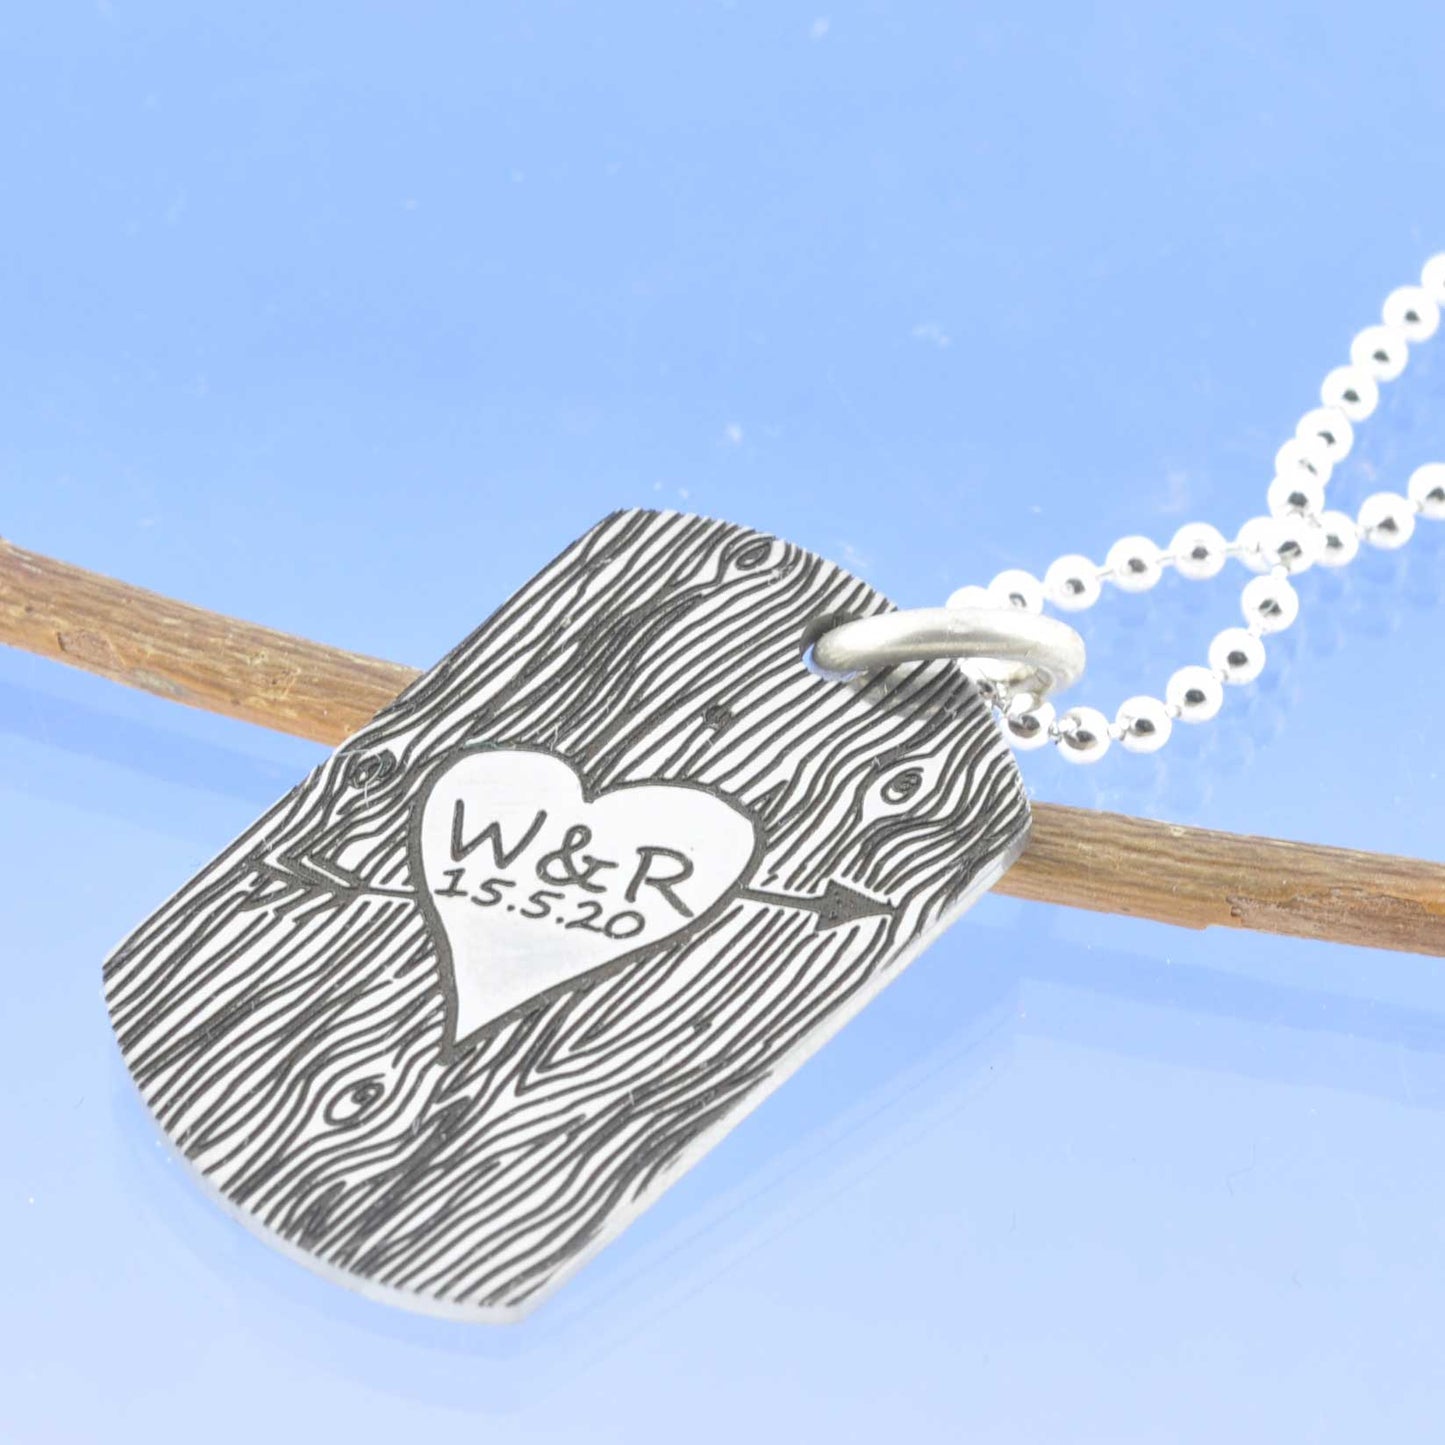 Lovers Wood Cut Steel Dog Tag Pendant by Chris Parry Jewellery